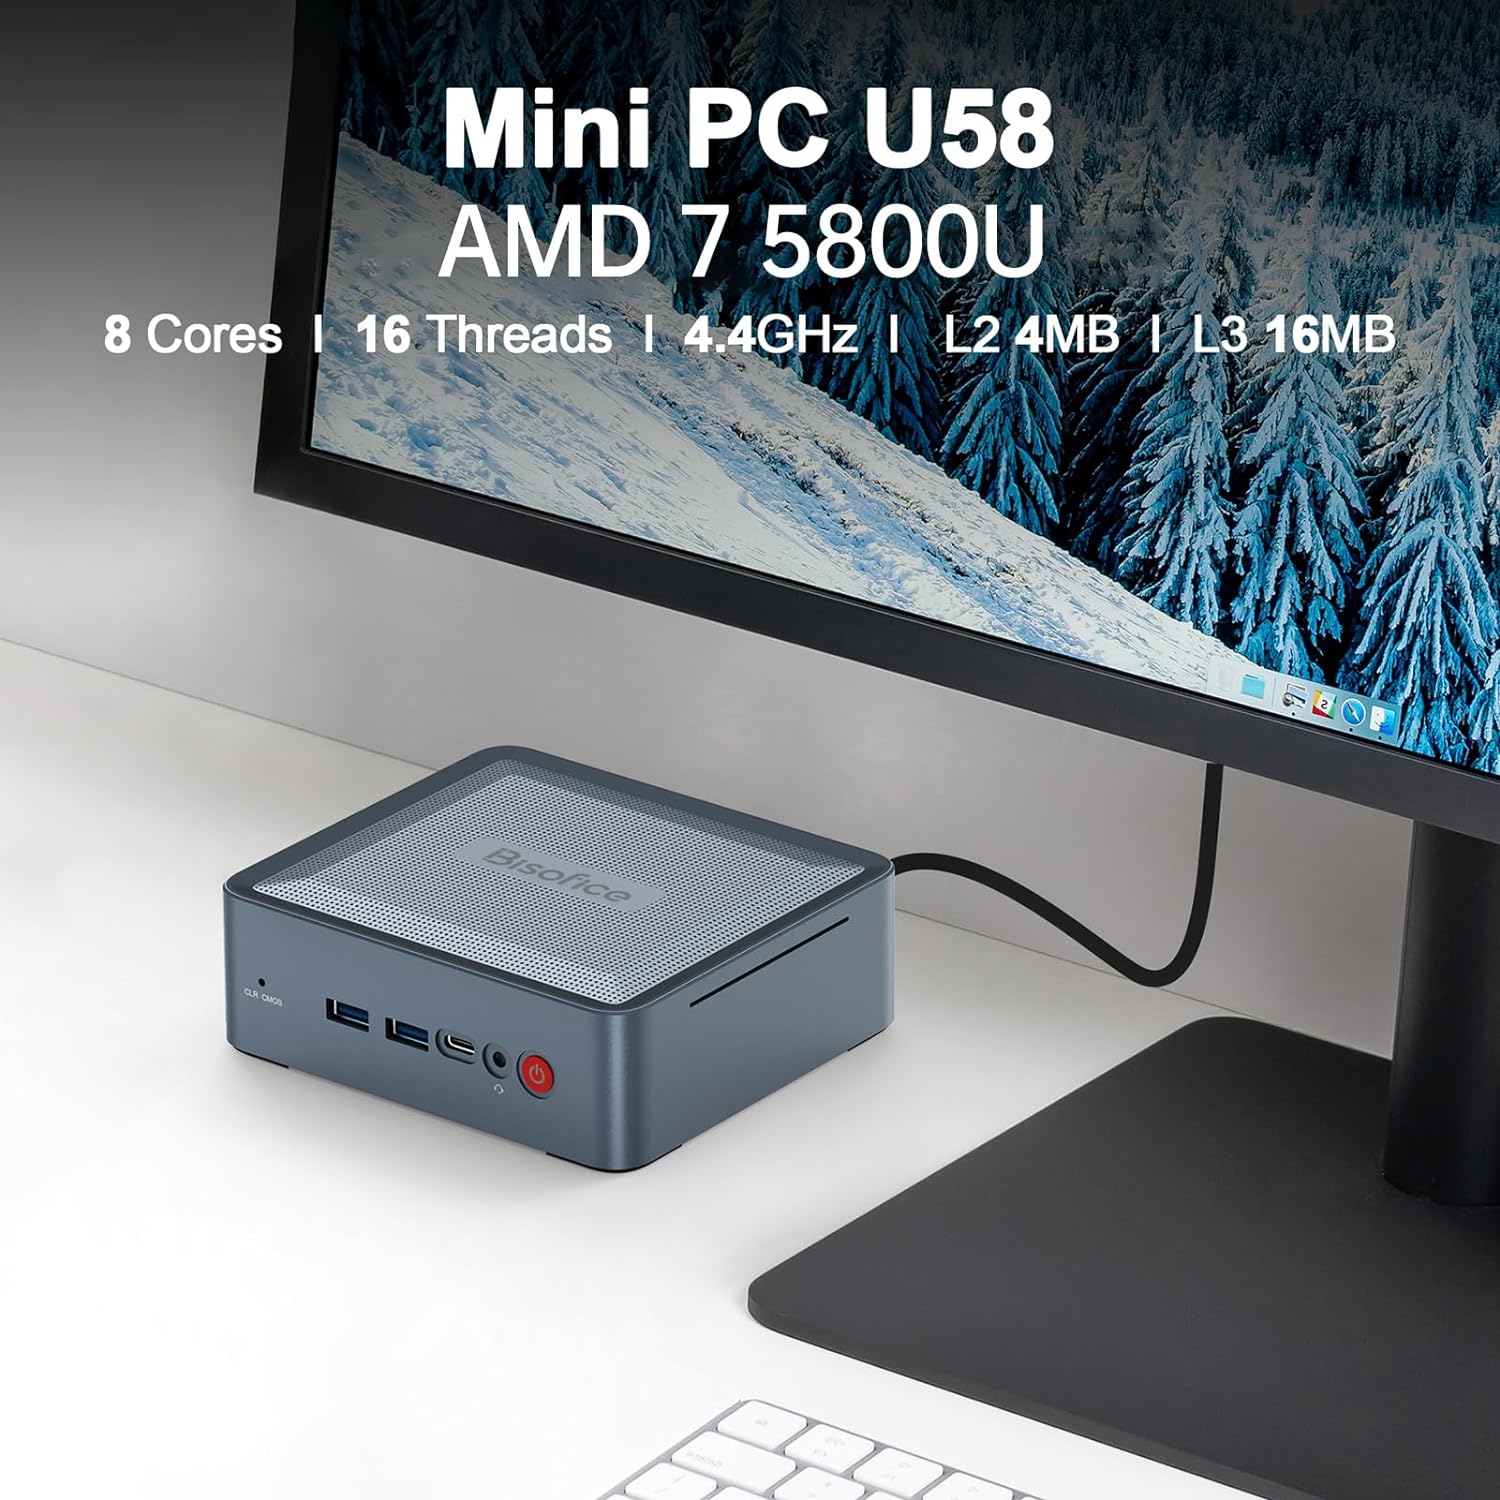 BUZHI Pocket PC,U58 Mini PC Desktop Computer with AMD Ryzen™ 7 5800U Processors 16G DDR4 Dual Channel 512G SSD Storage 8 Cores 16 Lines Threads Up to 4.4 GHz Support Triple Screen 4K Resolution